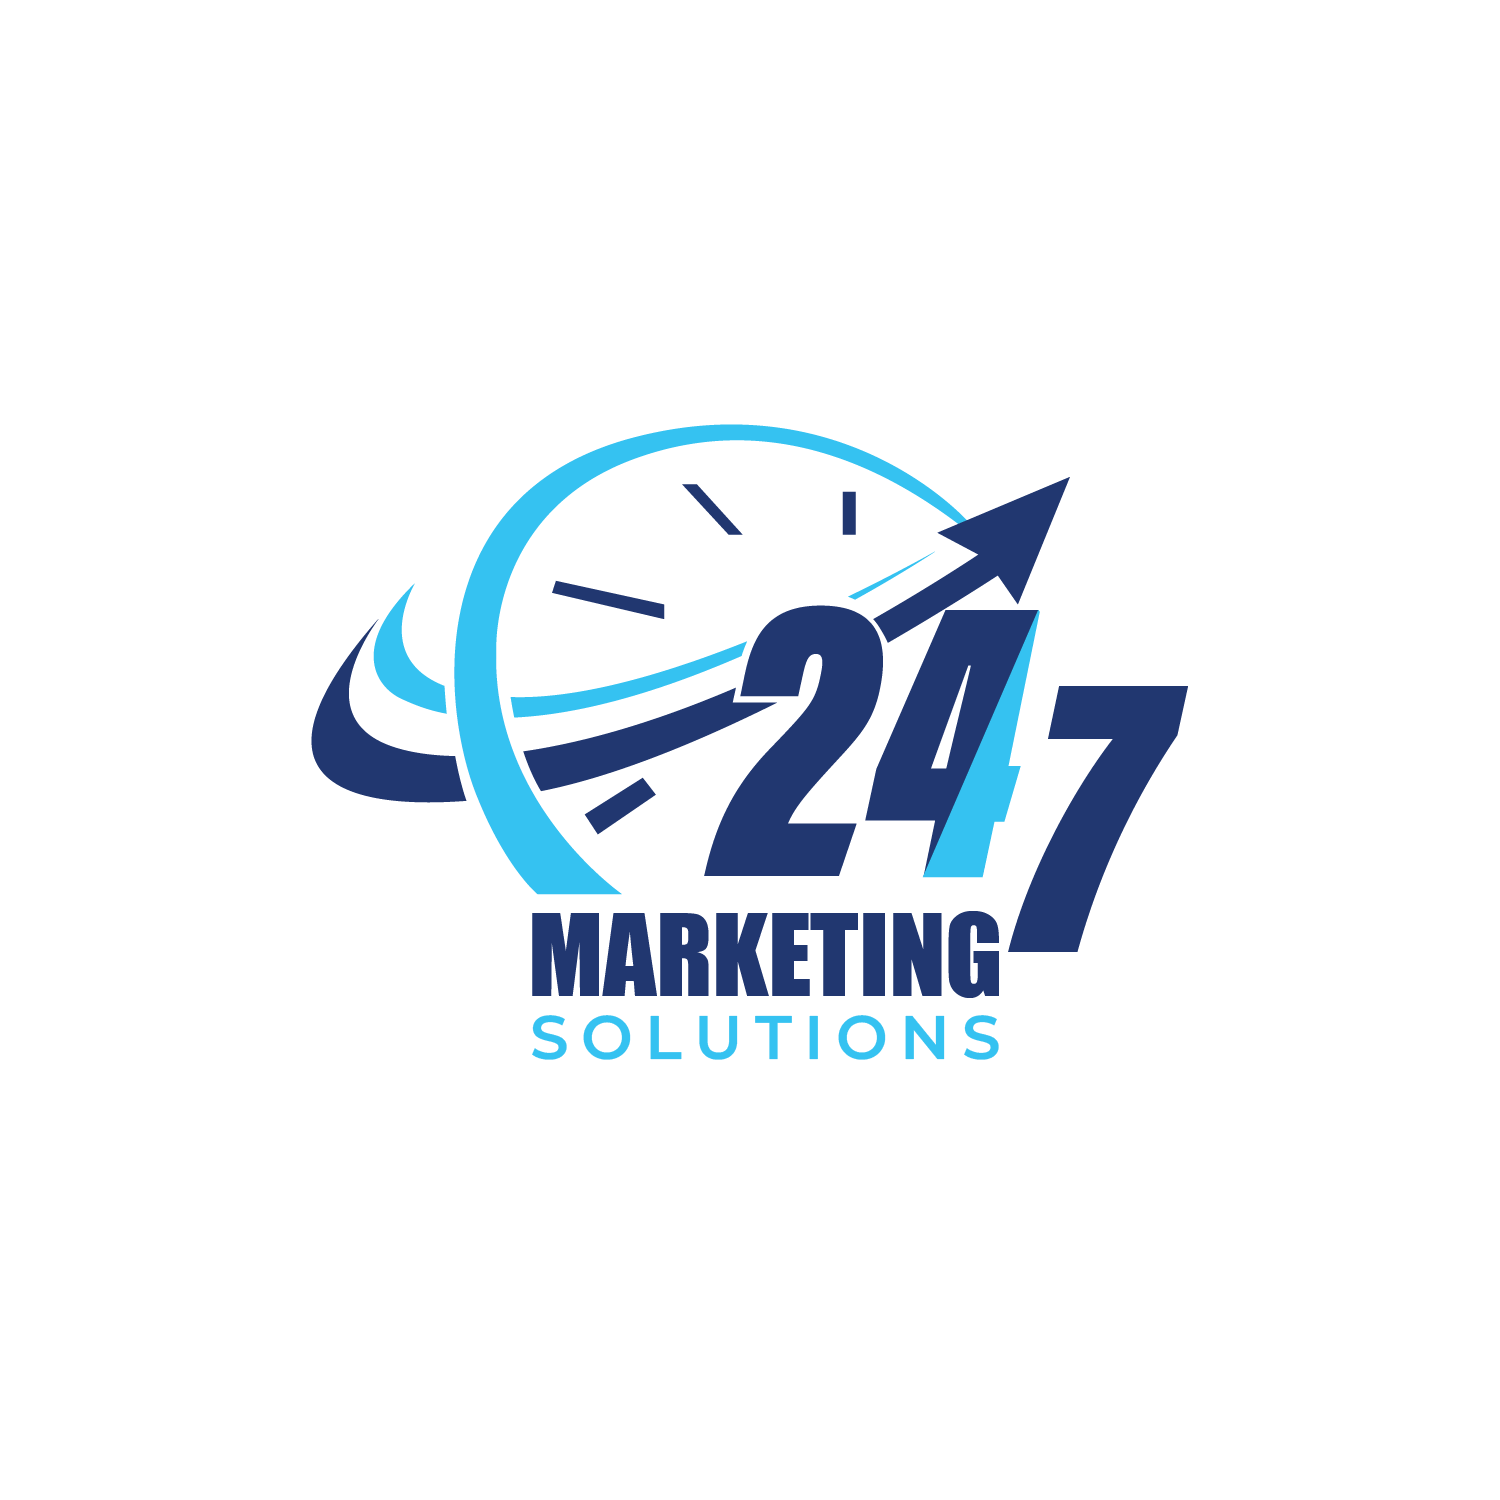 https://www.pakpositions.com/company/247-marketing-solutions